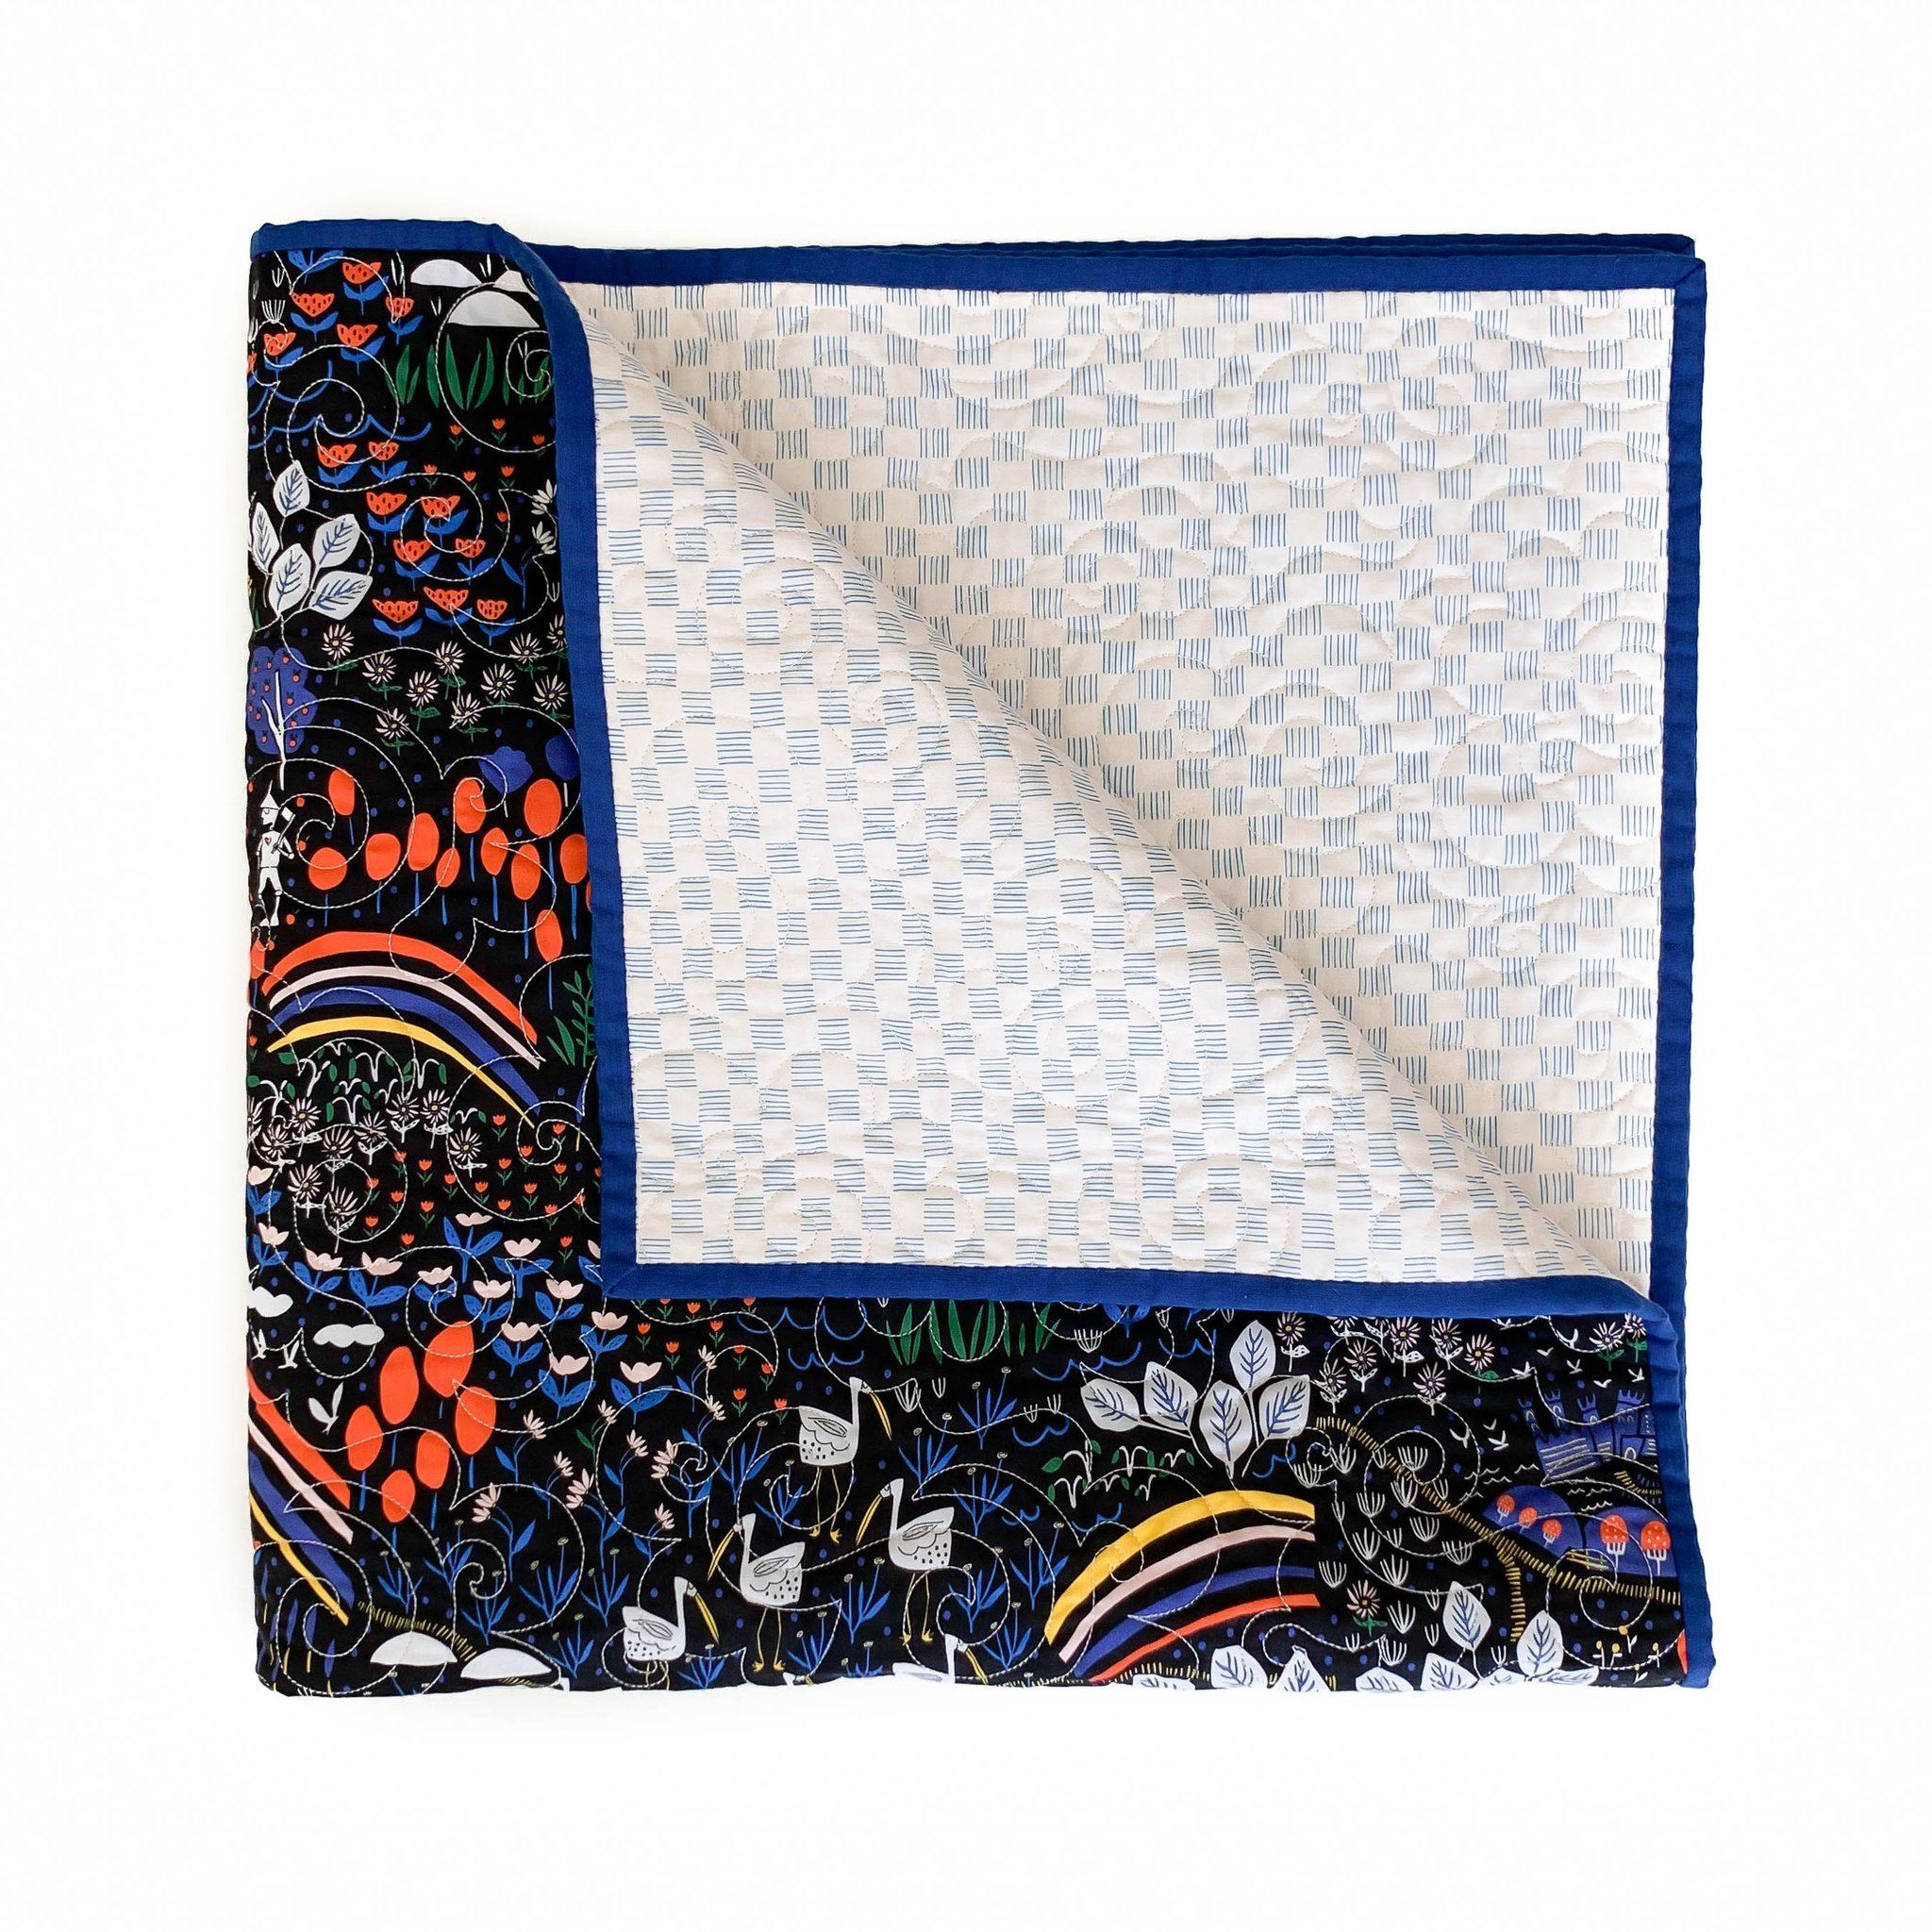 No Place Like Home Organic Quilt - Oz - Crib/Toddler Quilt